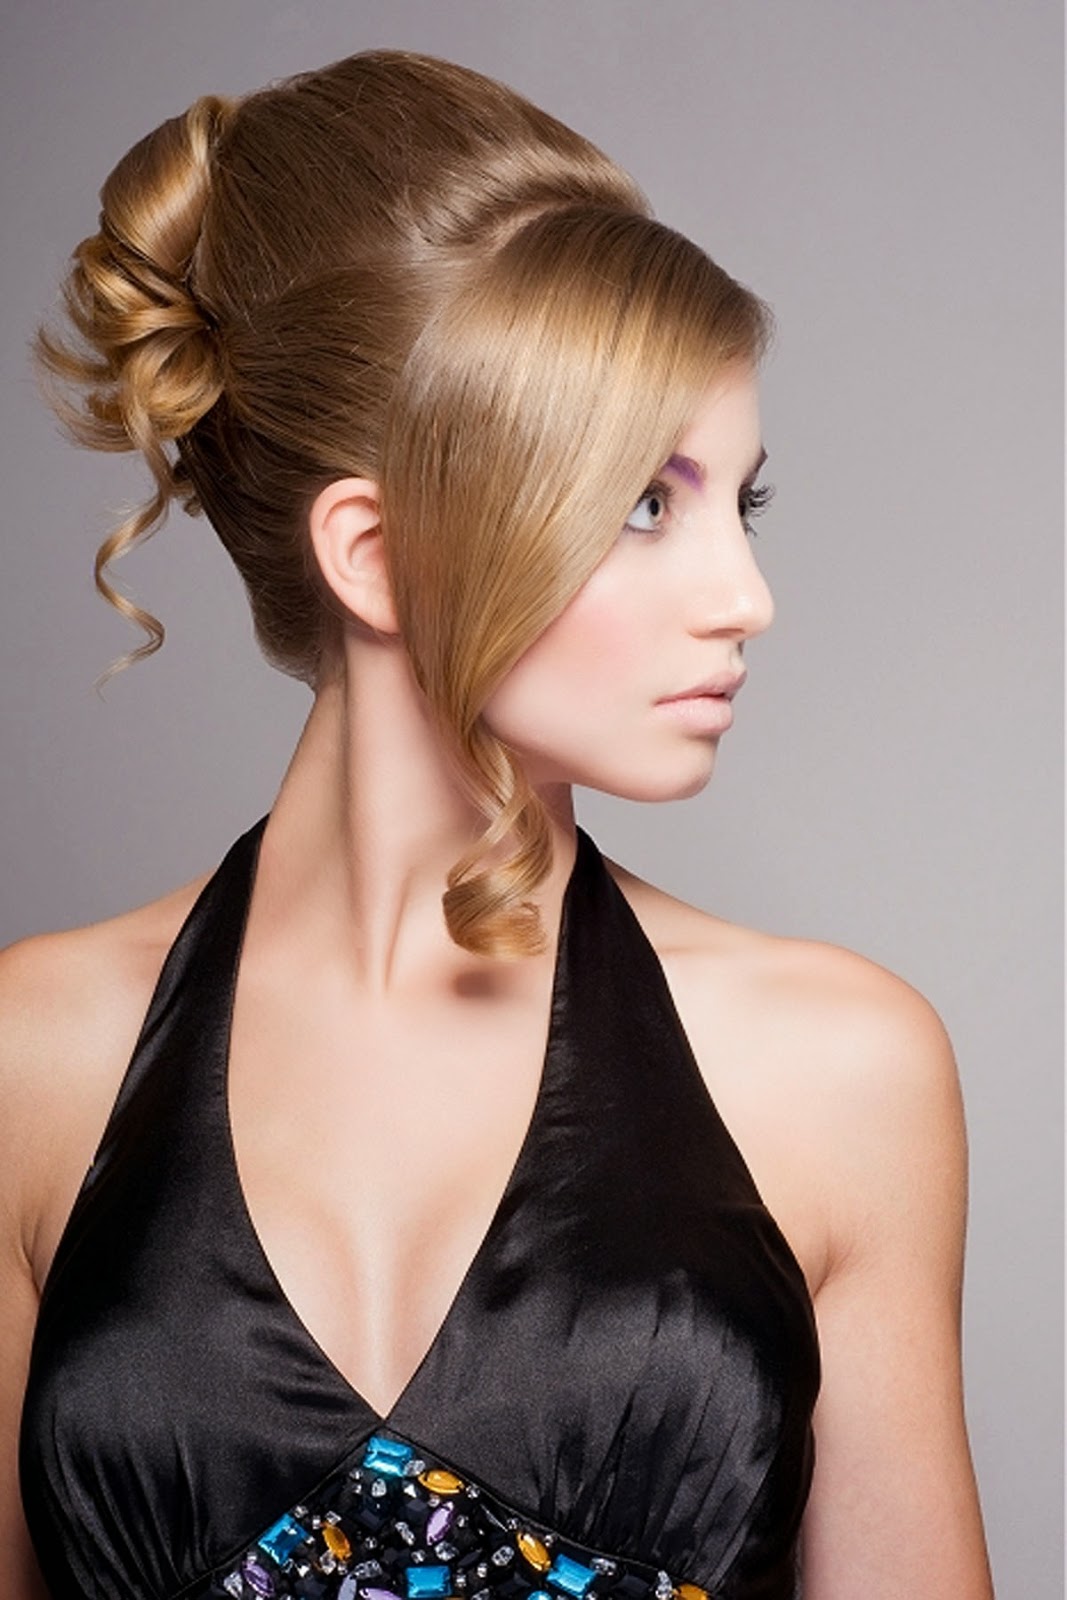 20 Easy Updo Hairstyles for Long Hair - MagMent